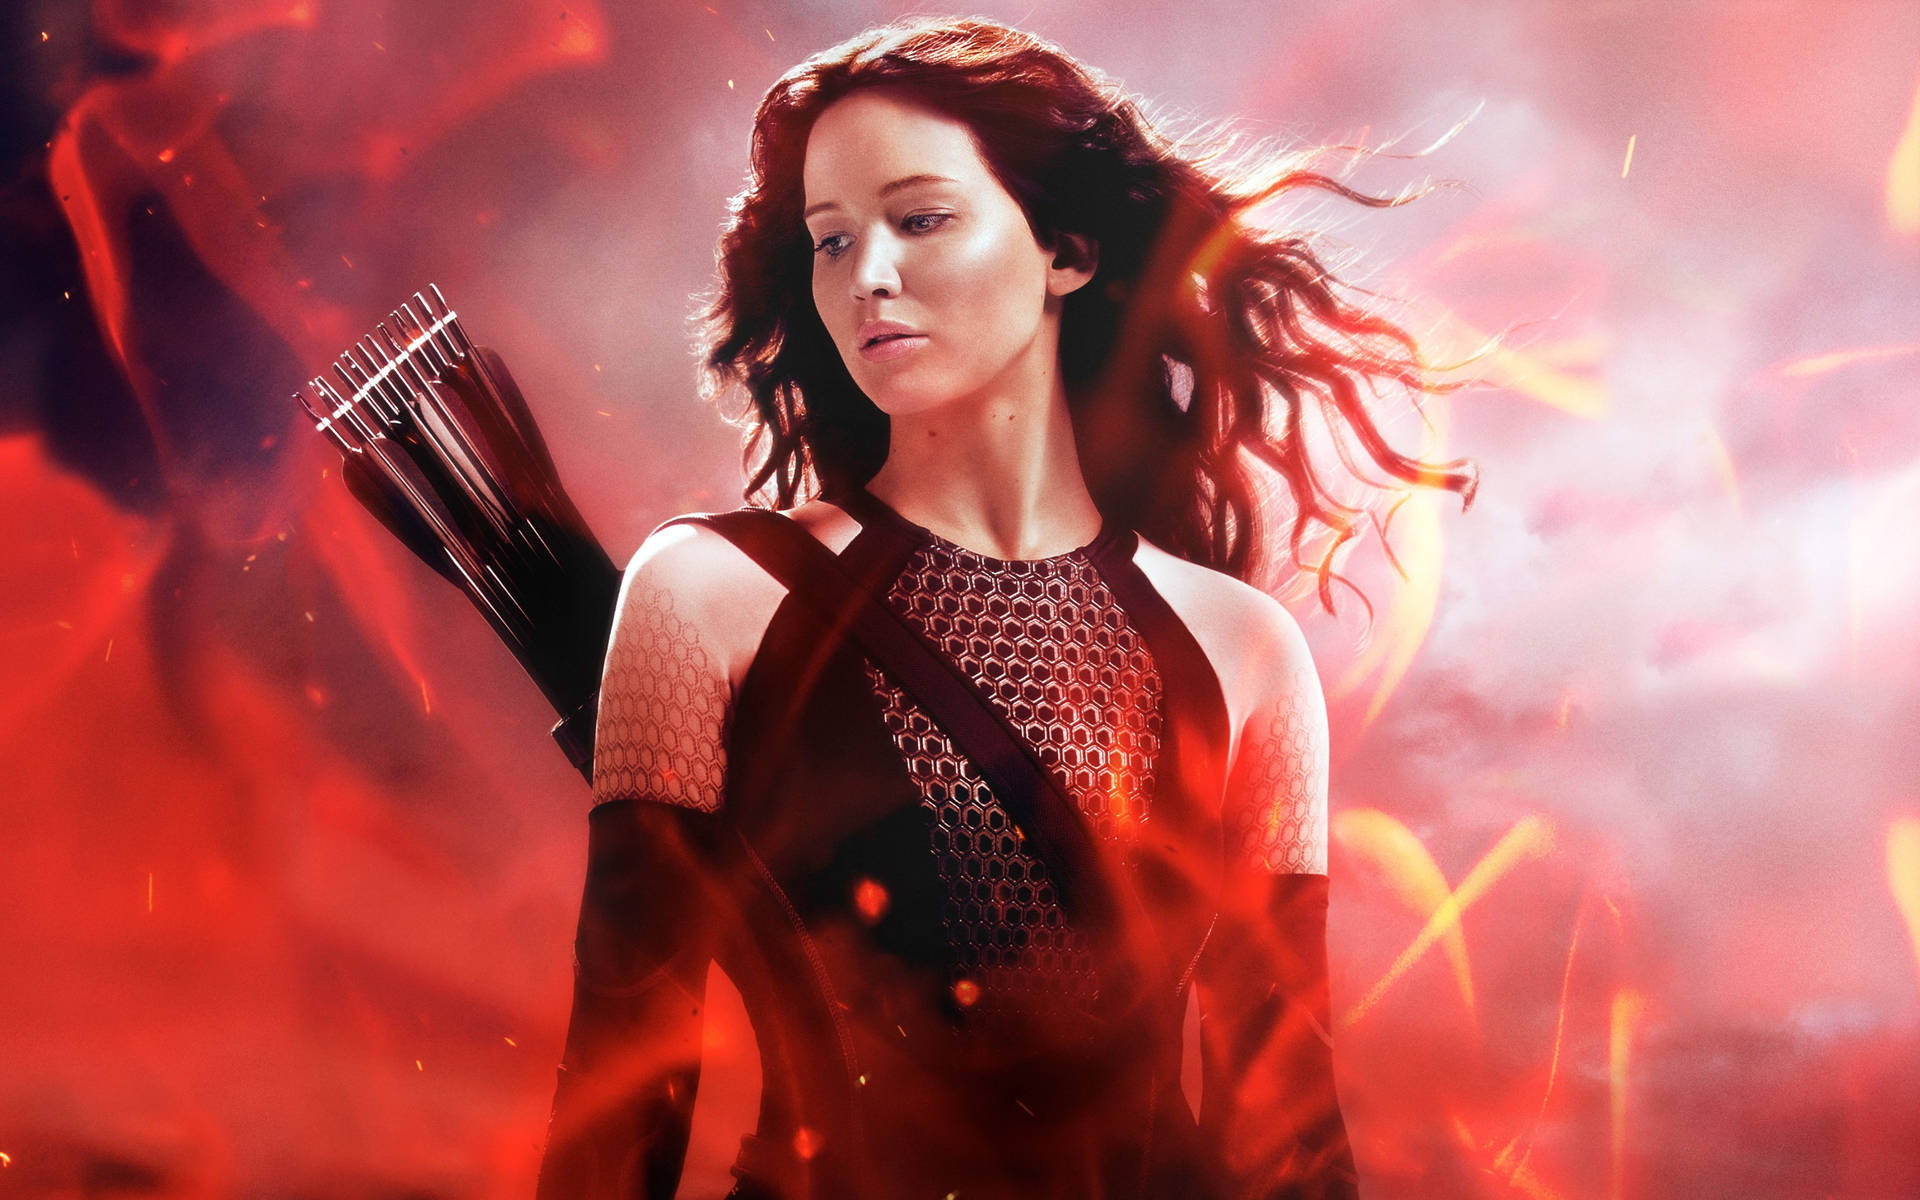 Jennifer Lawrence Hunger Games: Catching Fire Background